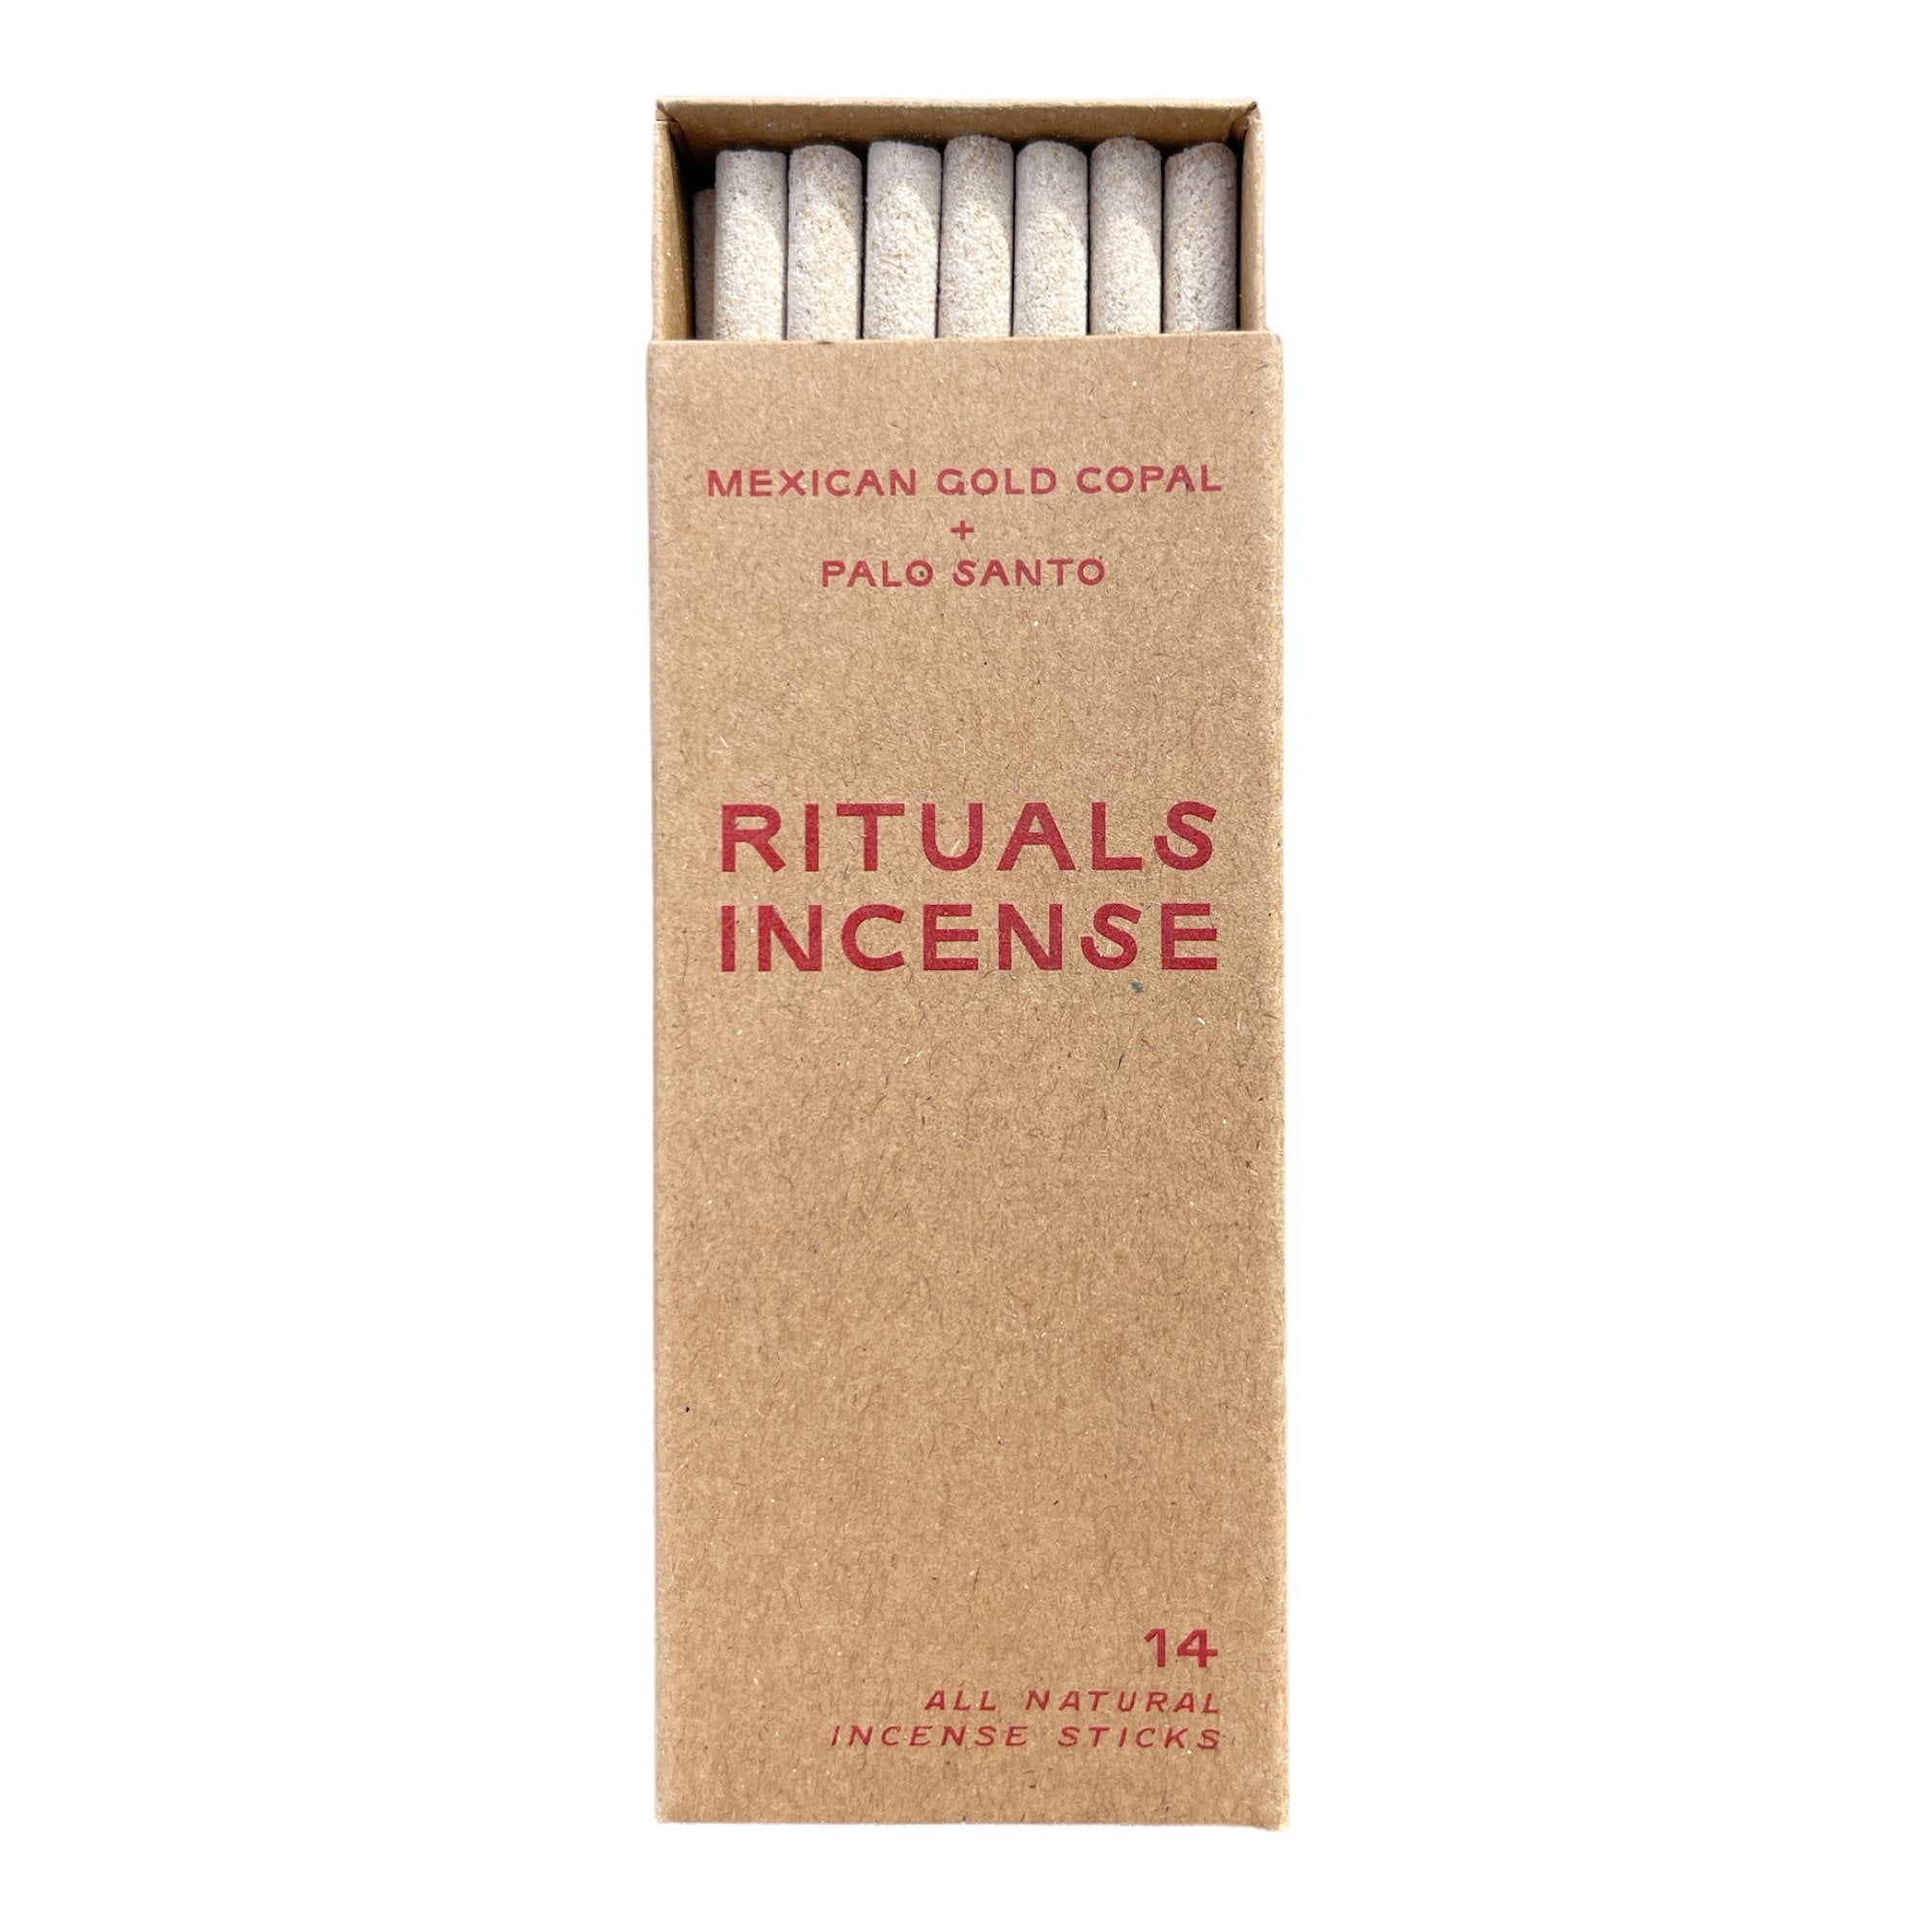 Mexican Gold + Palo Santo Incense | 14 Pack RITUALS INCENSE 